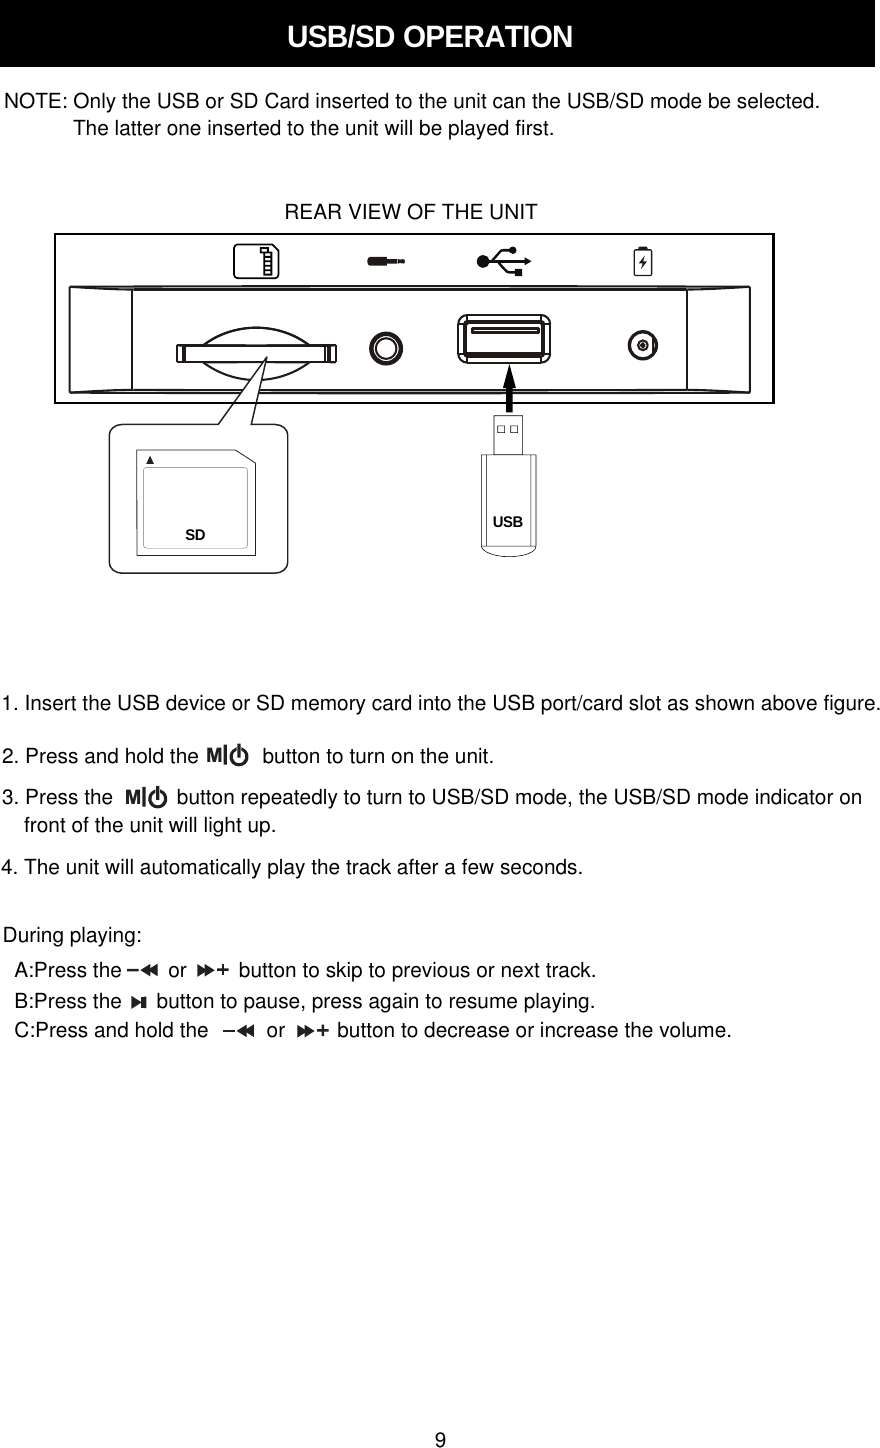 USB/Sd OPERATIONNOTE: Only the USB or SD Card inserted to the unit can the USB/SD mode be selected.The latter one inserted to the unit will be played first.1. Insert the USB device or SD memory card into the USB port/card slot as shown above figure.2. Press and hold the           button to turn on the unit.M3. Press the           button repeatedly to turn to USB/SD mode, the USB/SD mode indicator onMfront of the unit will light up.During playing:A:Press the        or         button to skip to previous or next track.B:Press the      button to pause, press again to resume playing.C:Press and hold the          or         button to decrease or increase the volume.4. The unit will automatically play the track after a few seconds.REAR VIEW OF THE UNIT9Sd USB